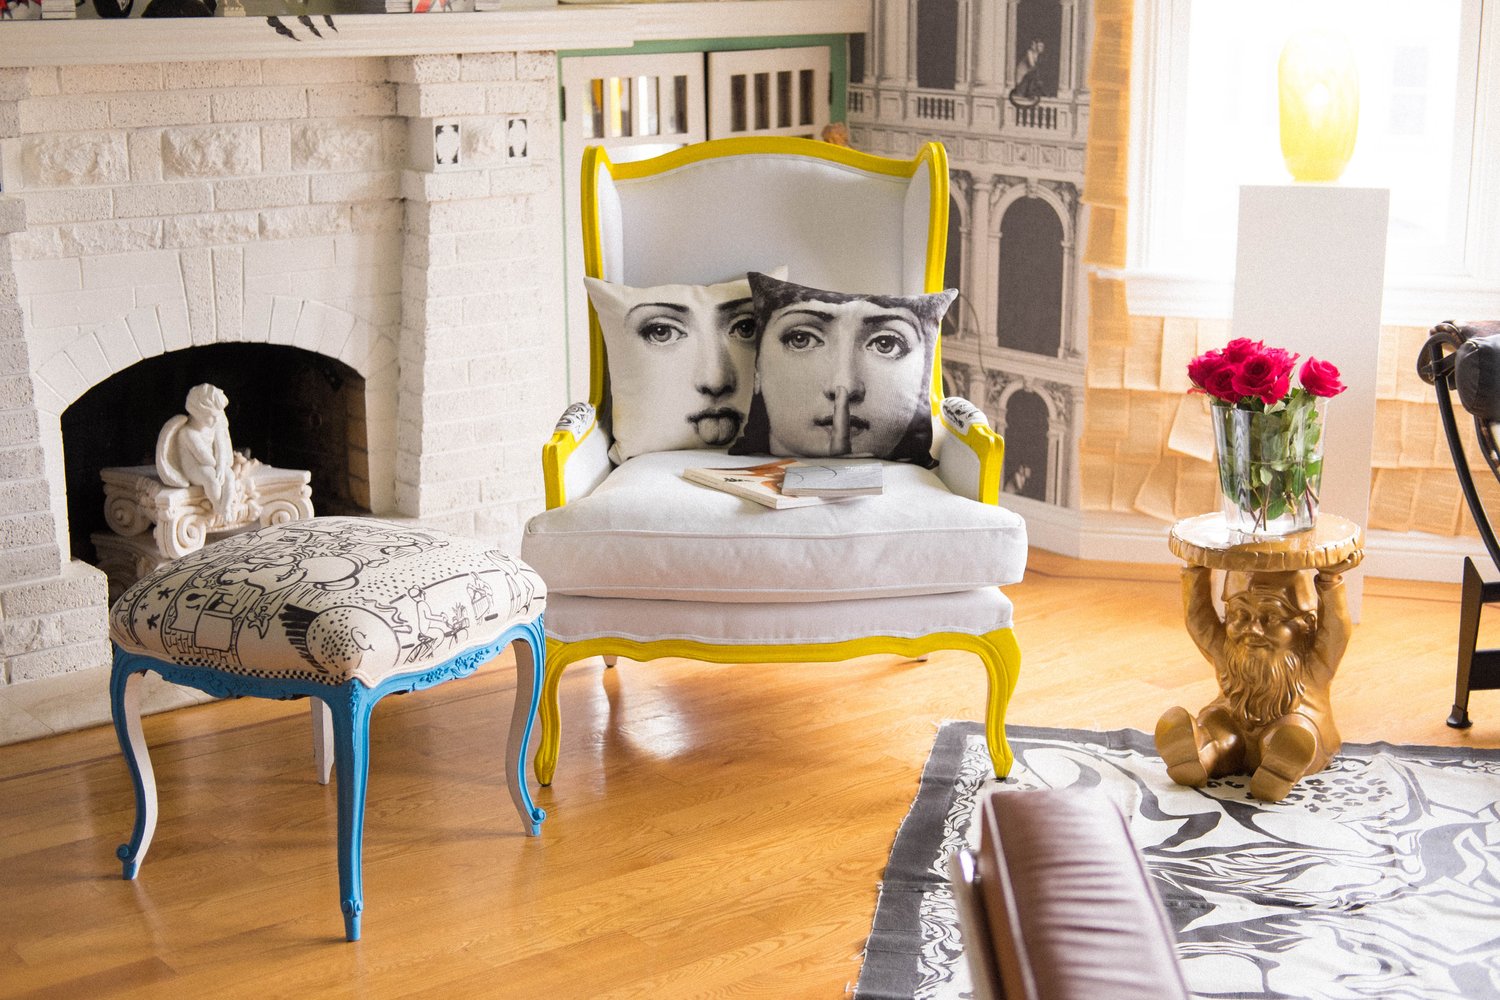 The image shows a cozy living area featuring a white armchair with yellow trim, two pillows with faces on them, and a small table, supported by a golden sculpted figure holding a vase of red roses.